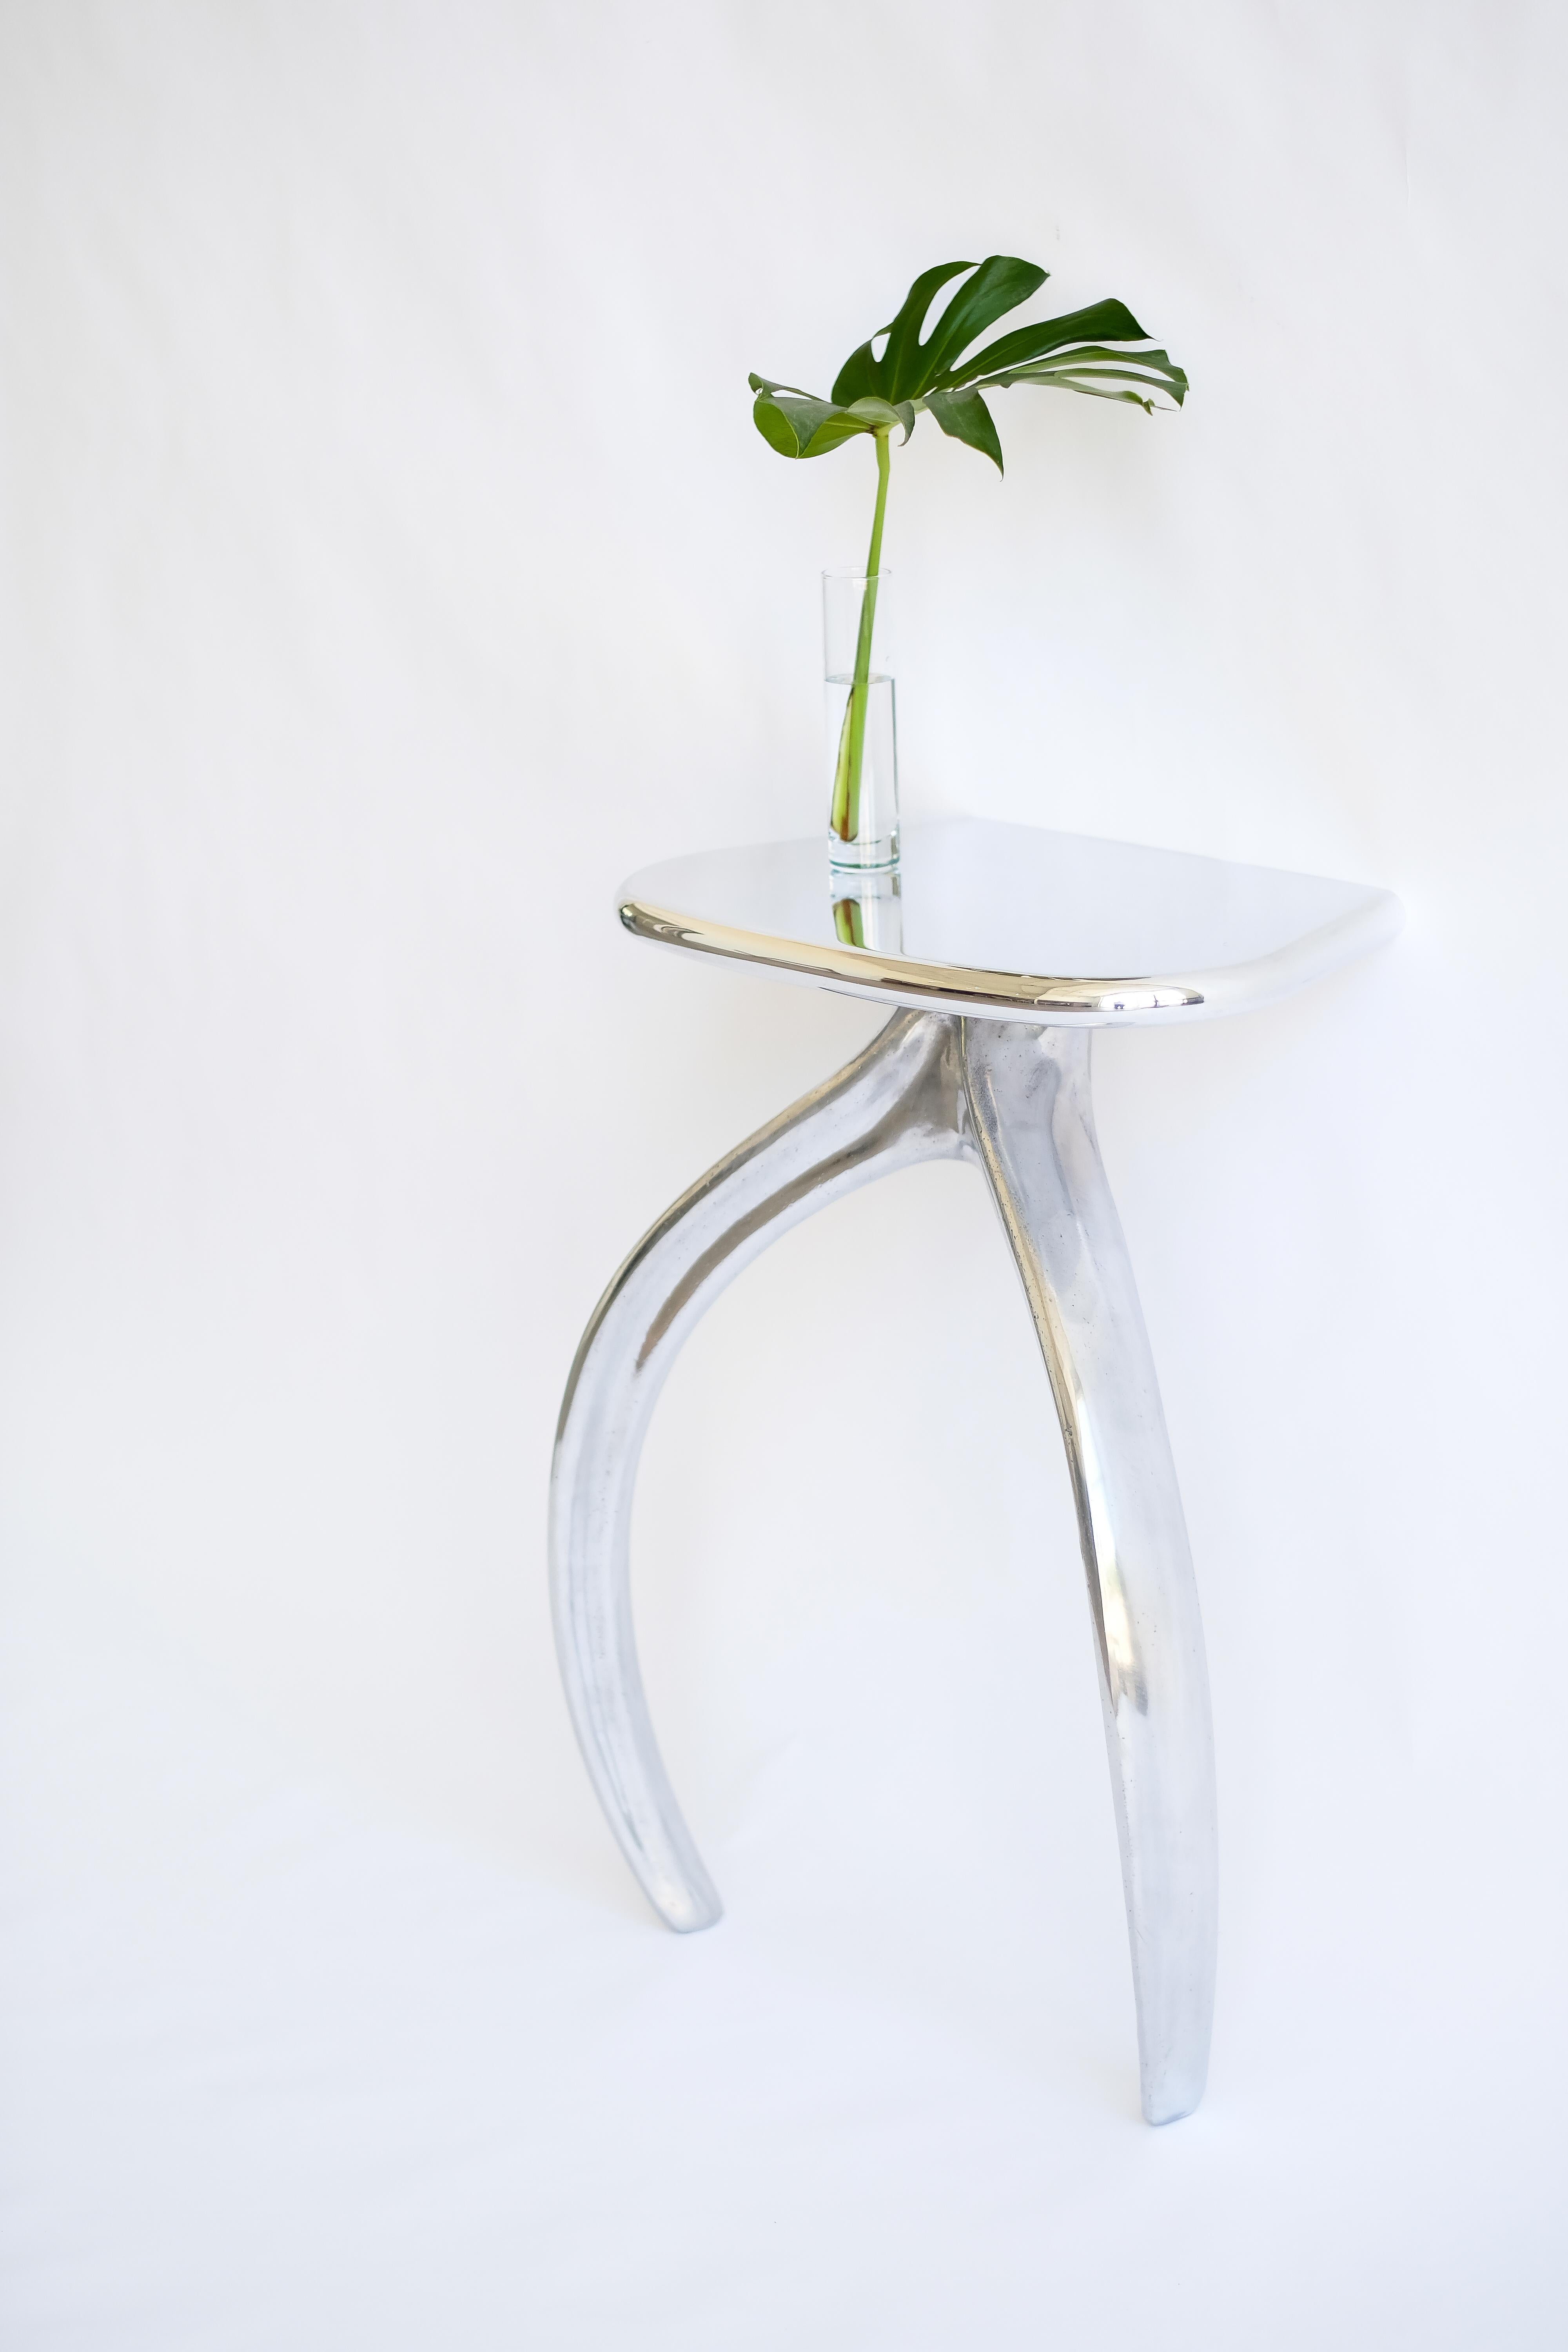 This design pairs STACKLAB’s signature Wishbone casting in aluminum or bronze with a matching milled aluminum or bronze
Demi-lune tabletop. The Wishbone series honours central-eastern Canada’s manufacturing heritage, the Wishbone is cast in sand-